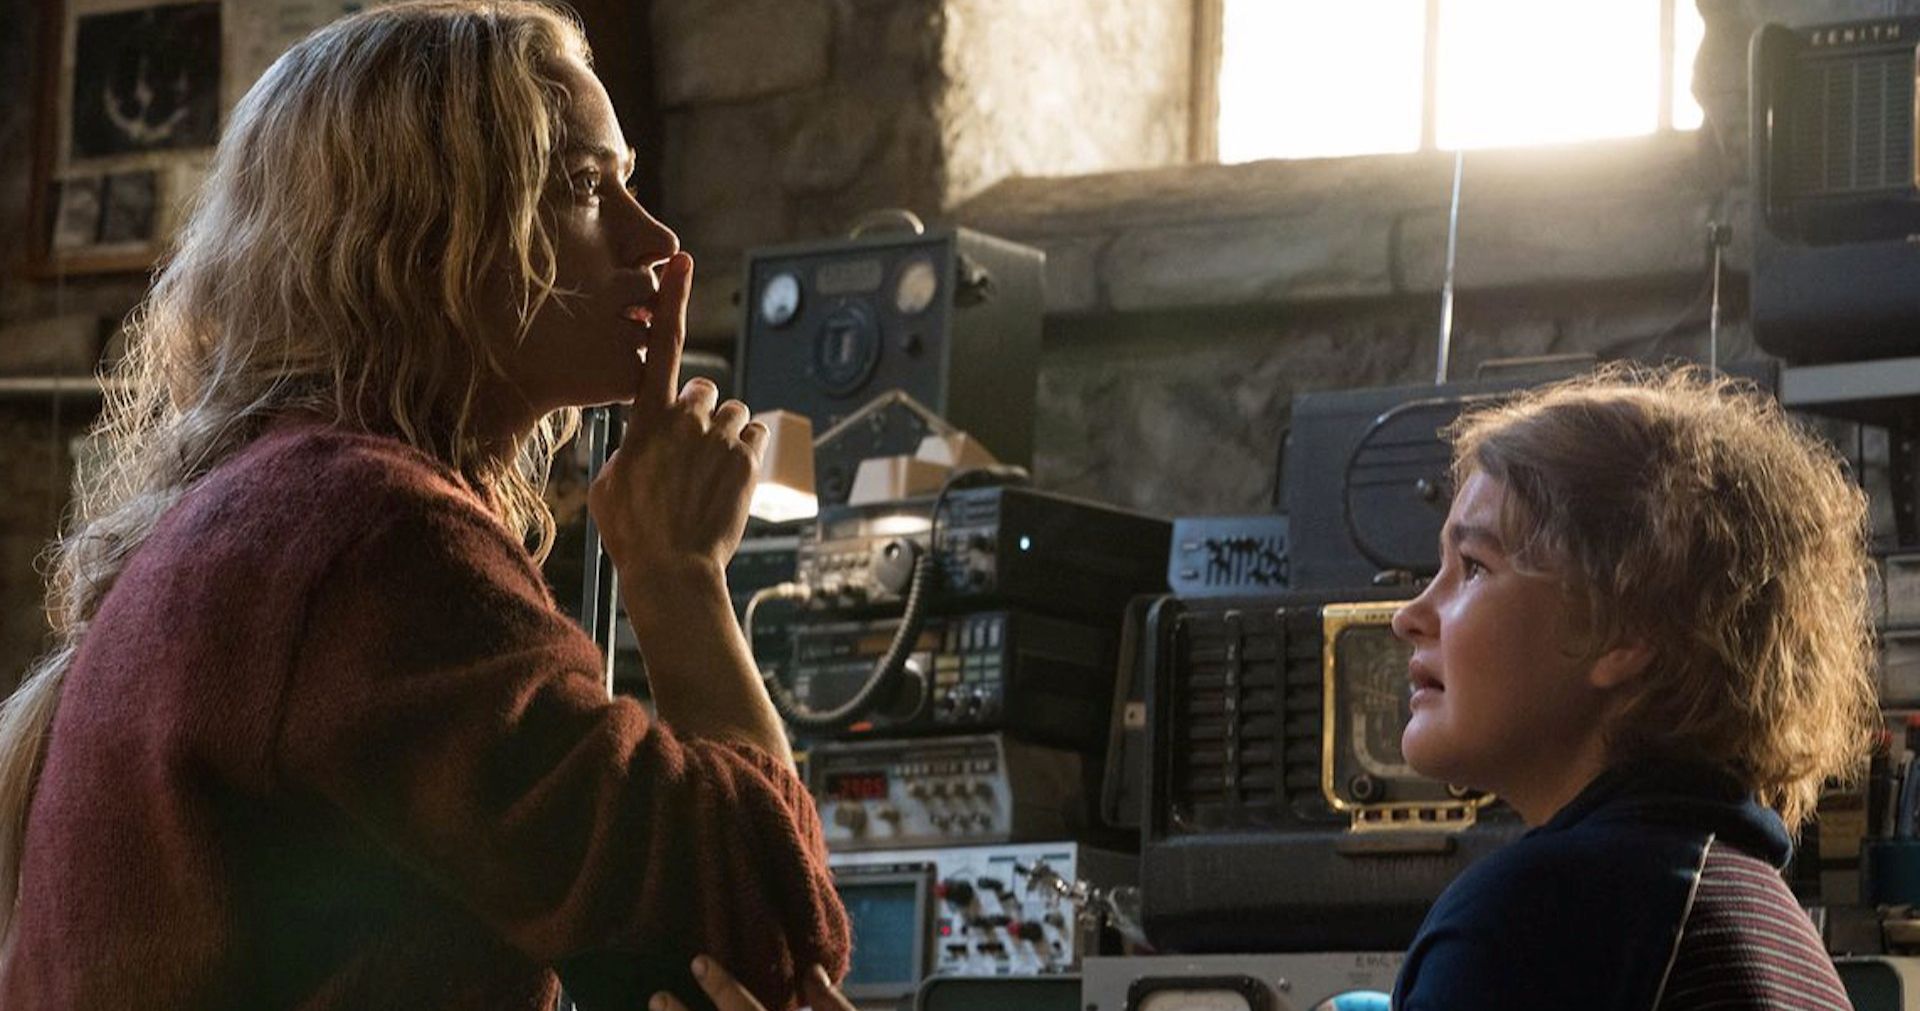 Shush! A Quiet Place 2 Has Started Shooting So Don't Make a Sound